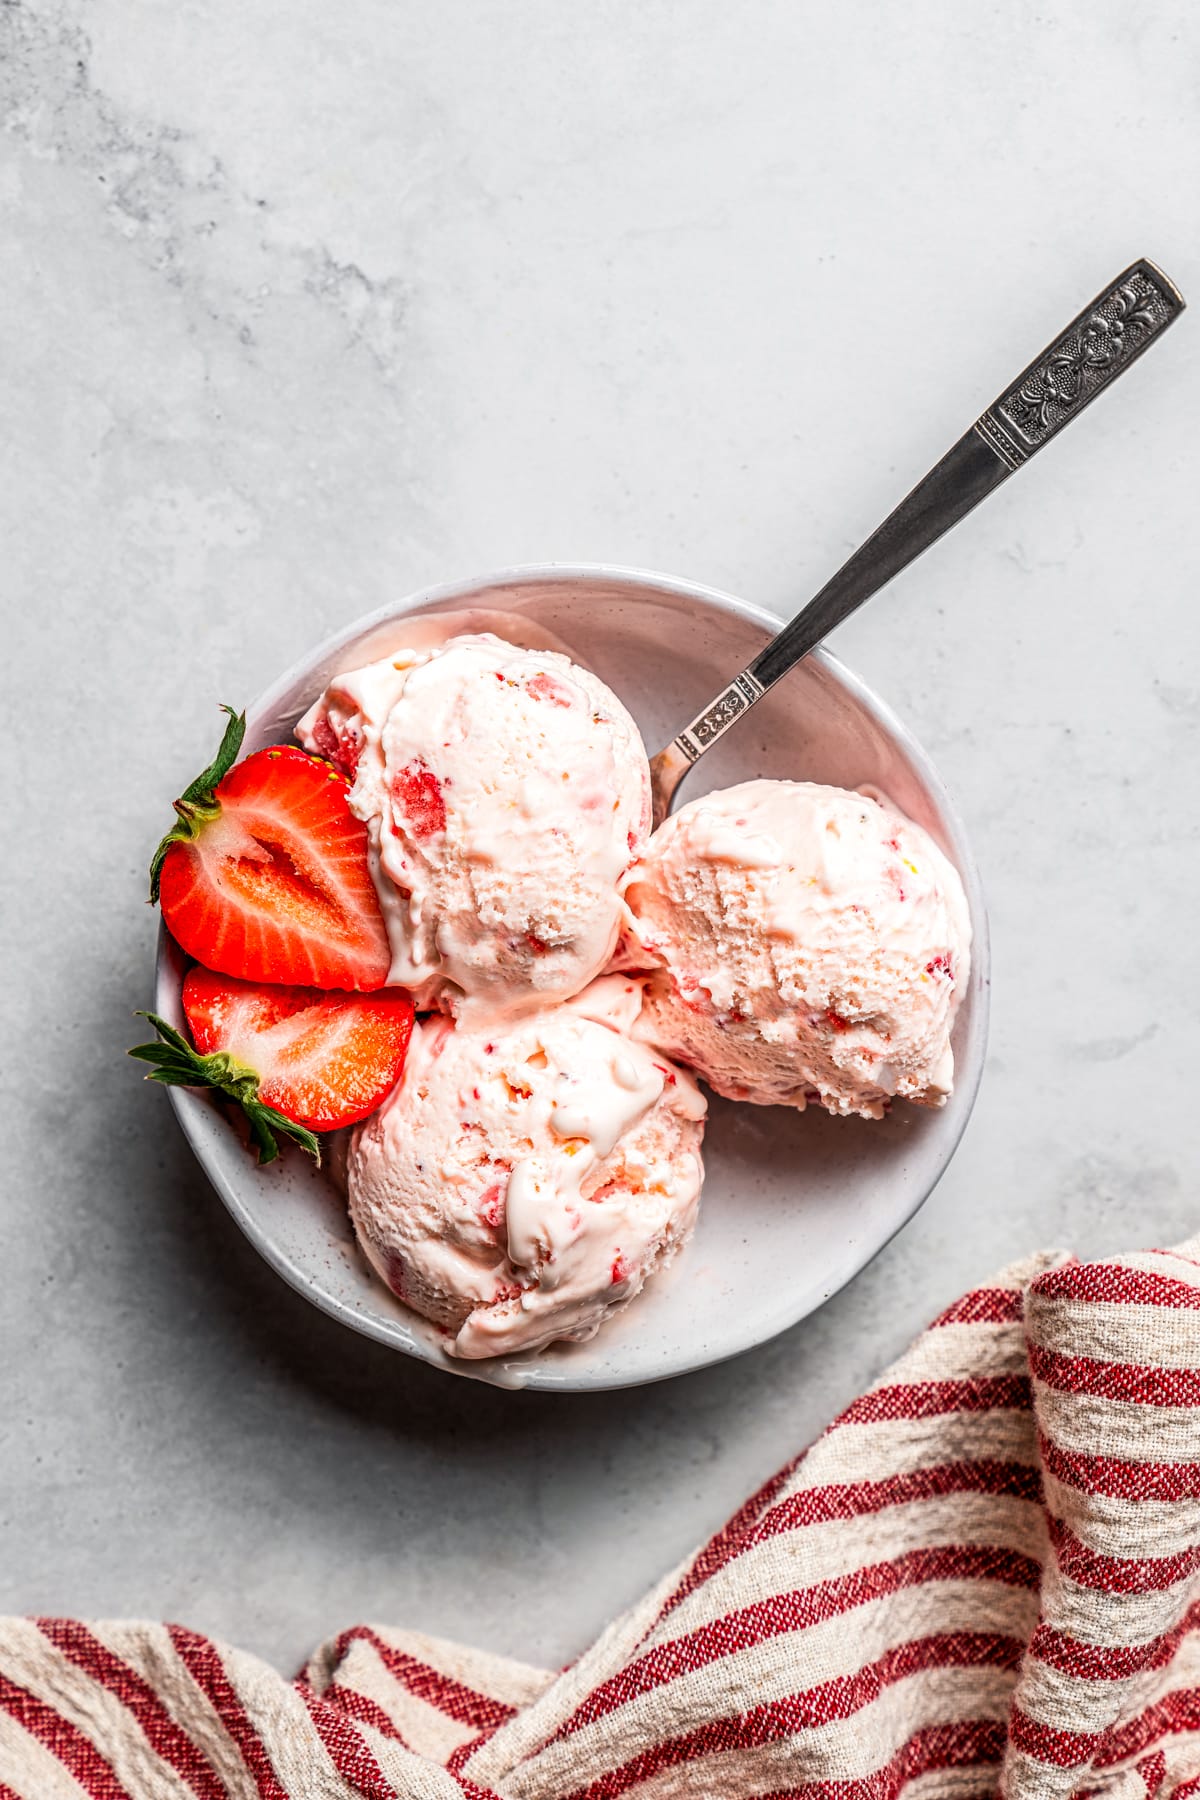 Overhead view of three scoops of strawberry cheesecake ice cream in a bowl garnished with fresh strawberries.